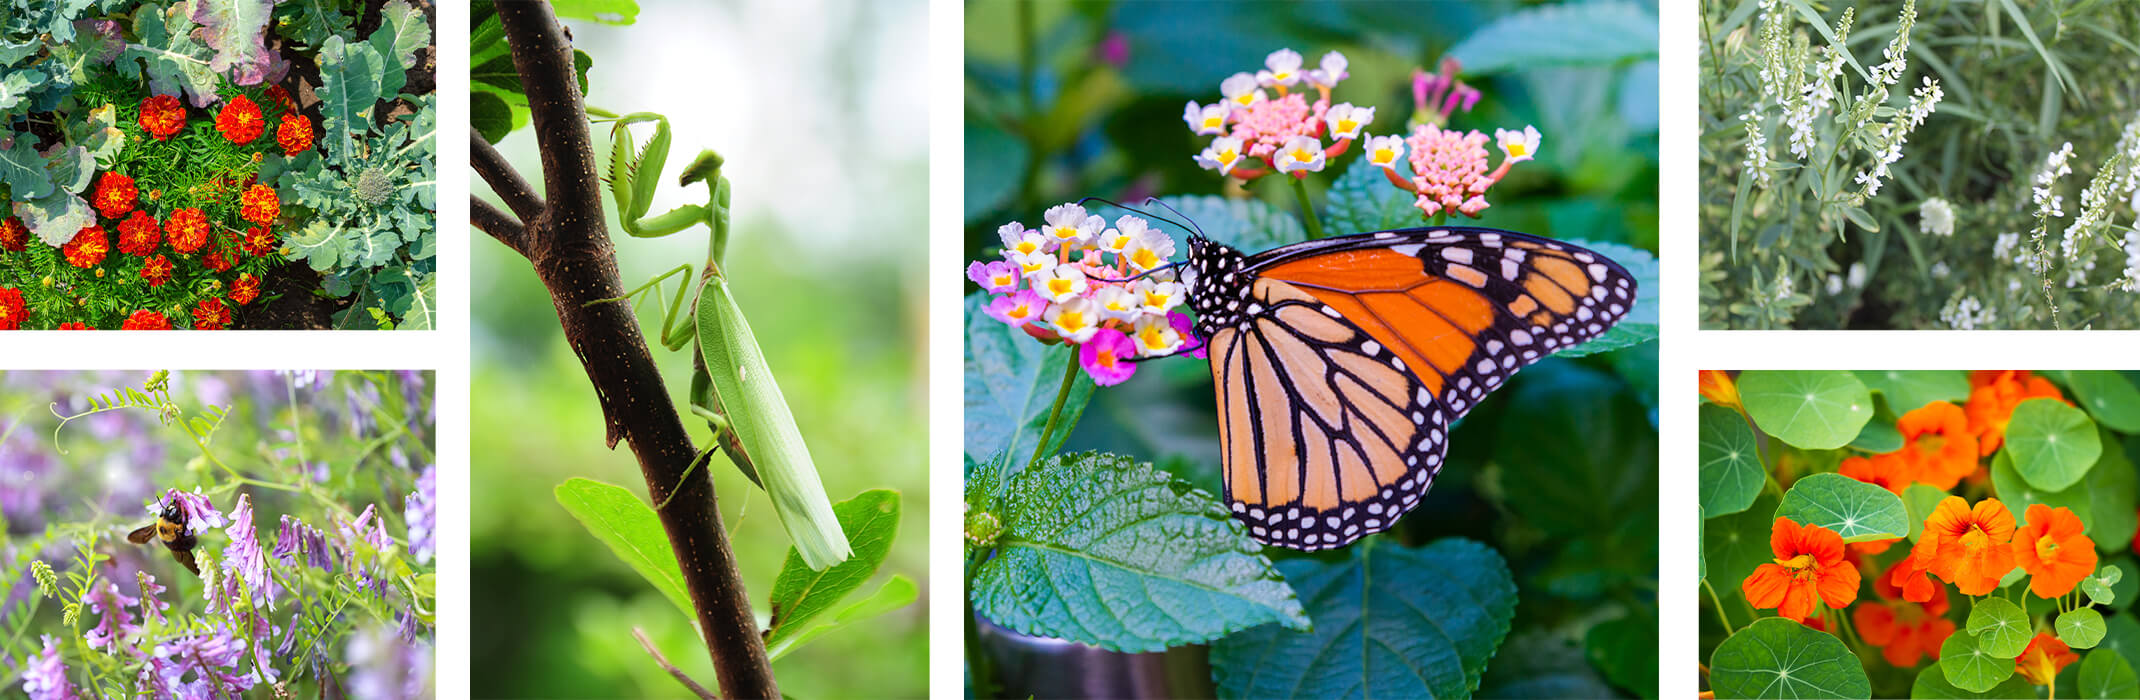 A collage of 6 images: marigolds in garden, hairy vetch flowers and carpenter bee, praying mantis on limb, monarch butterfly on lantana flowers, white sweet clover, and nasturtium flowers